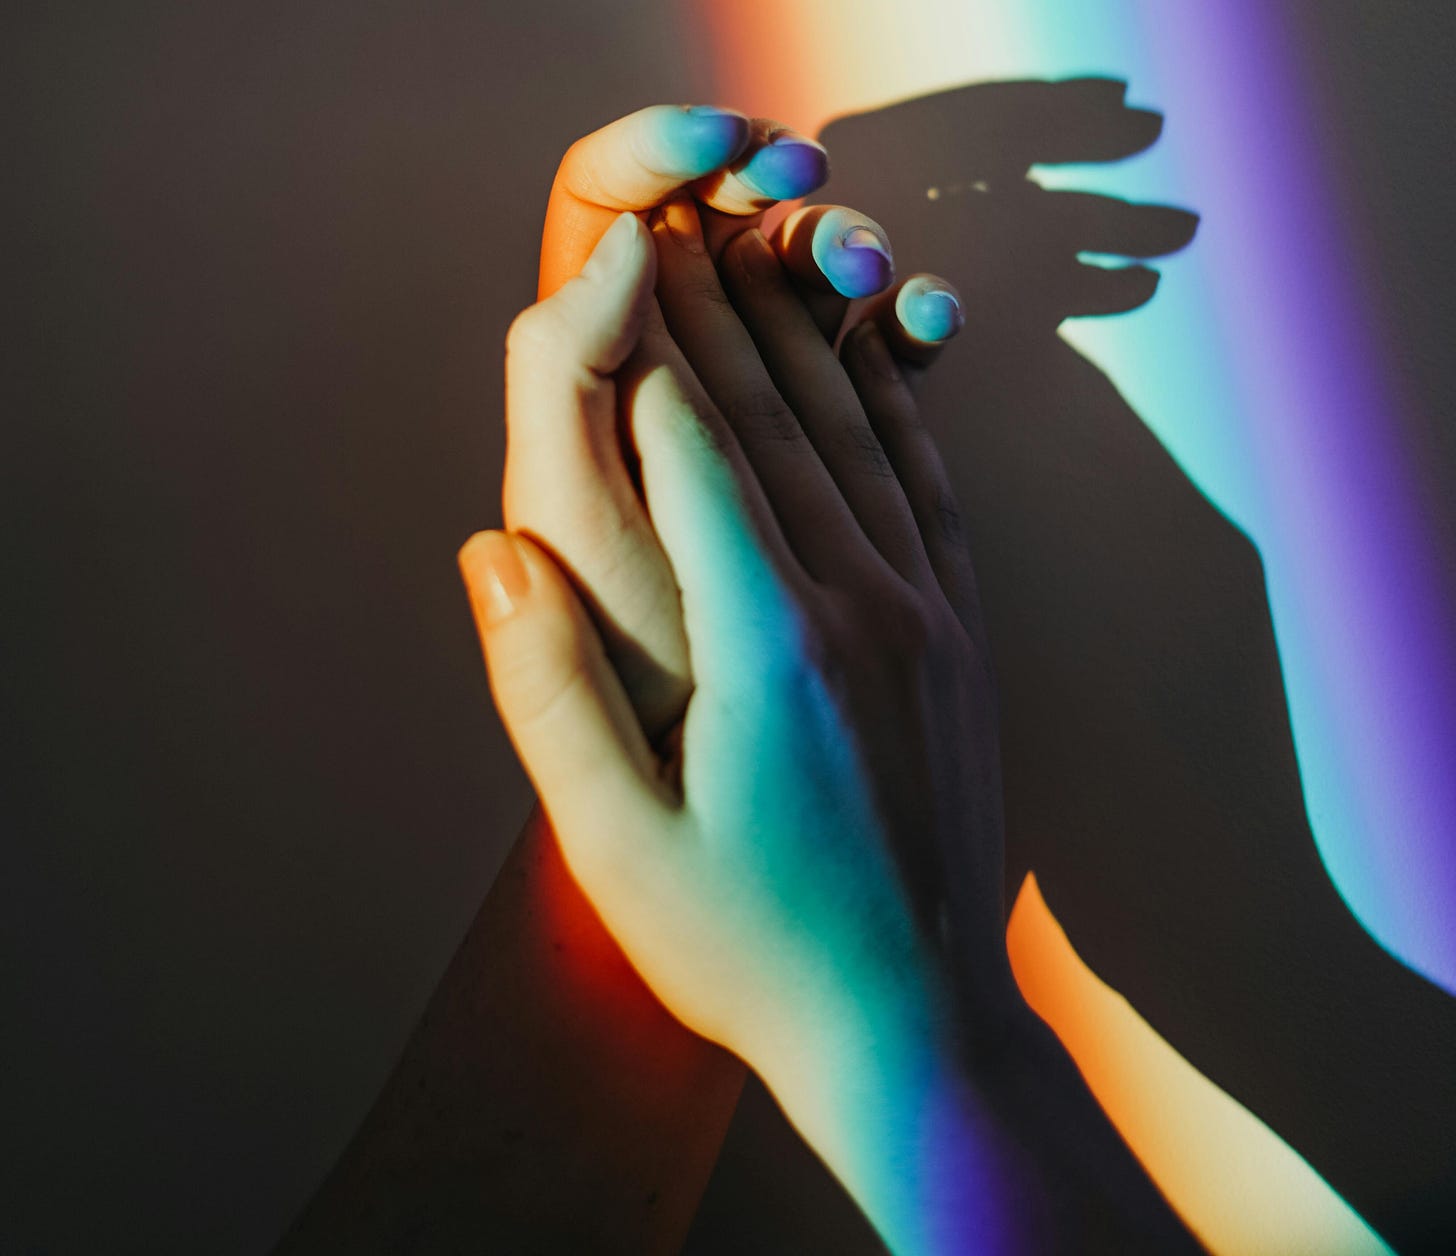 Two hands holding each other. A rainbow of light is projected over them.